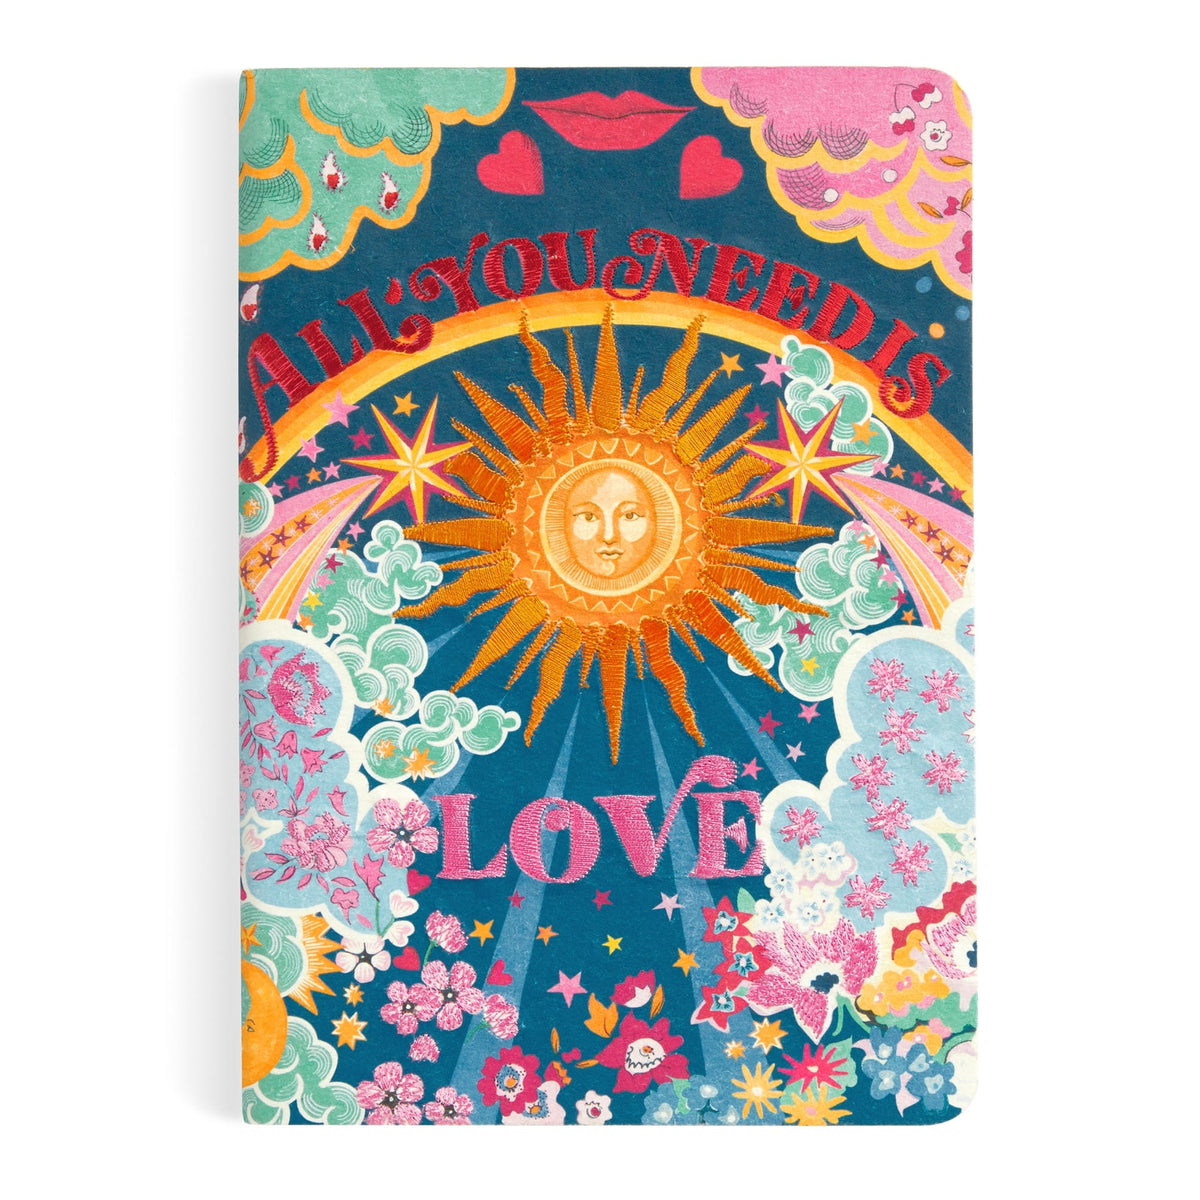 Liberty All You Need is Love B5 Handmade Embroidered Journal Journals Liberty of London Ltd 